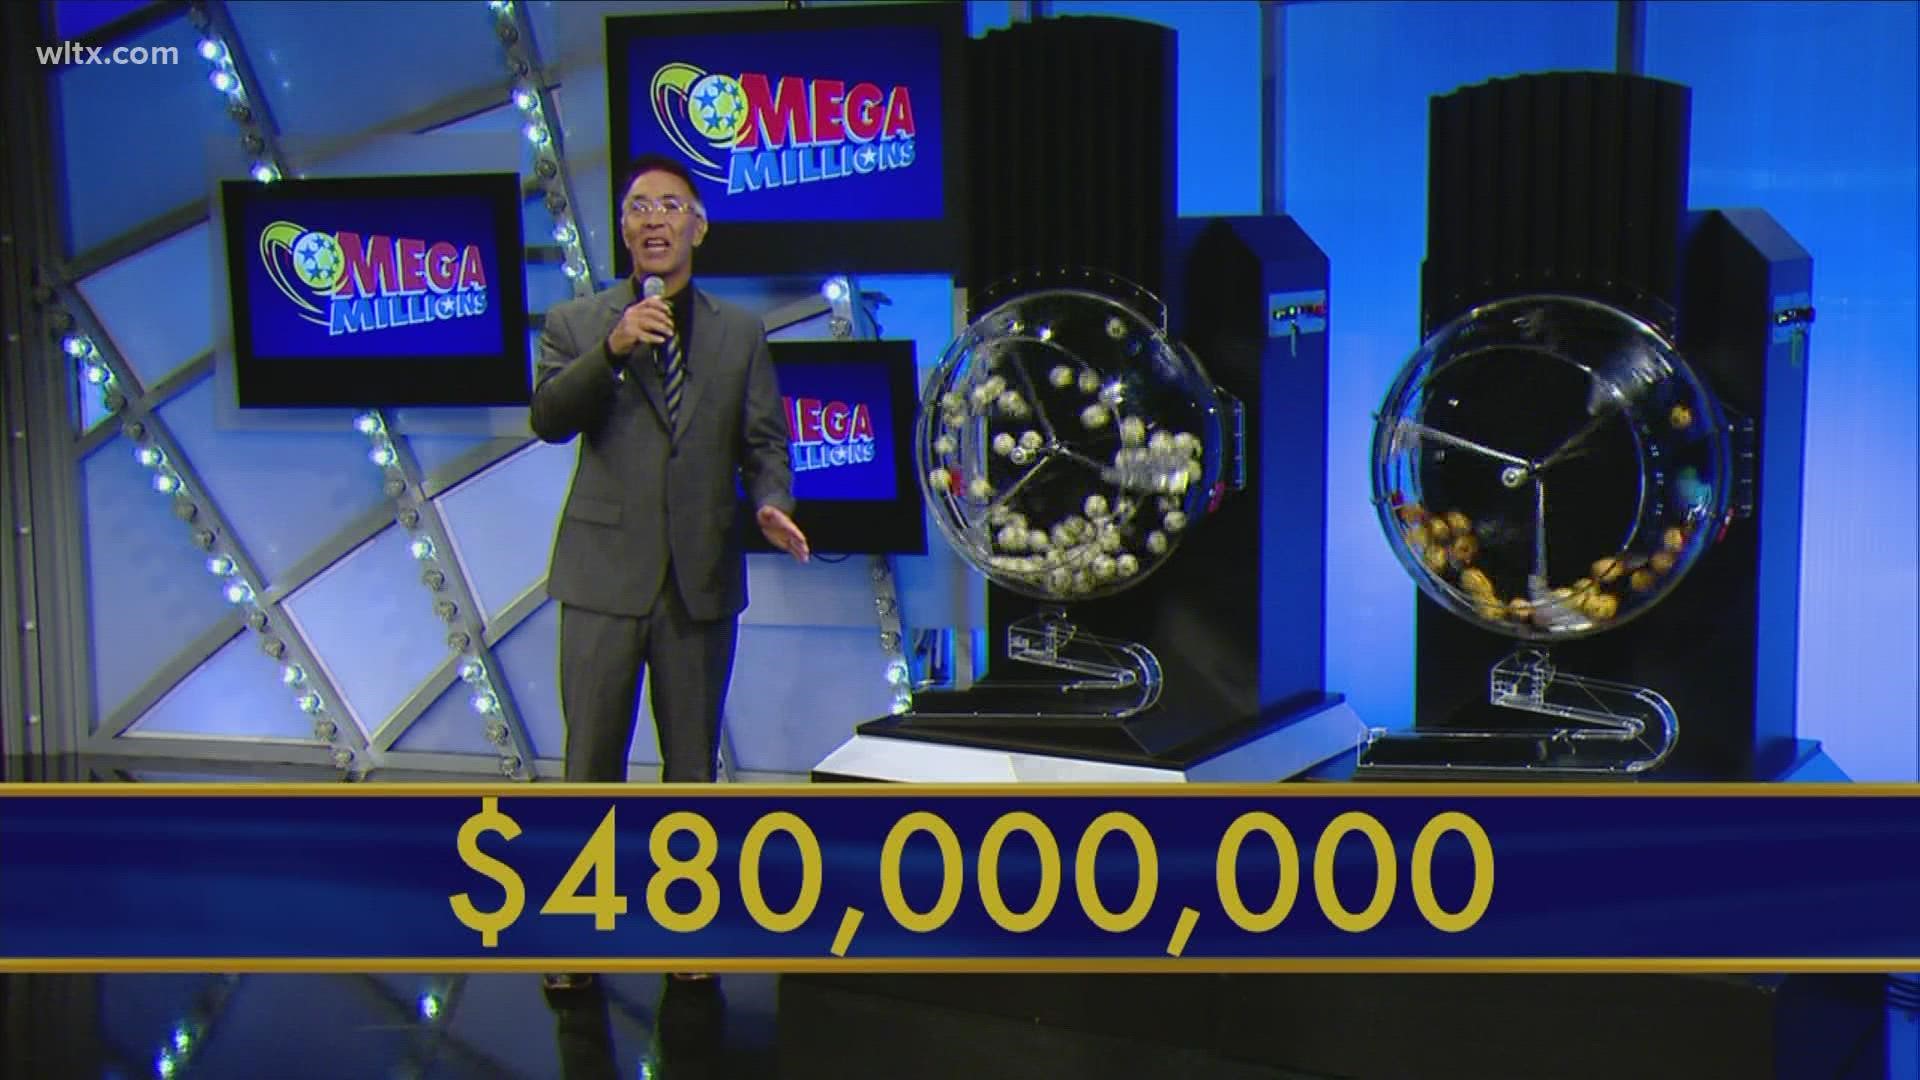 What is the Mega Millions jackpot for the July 19 drawing?